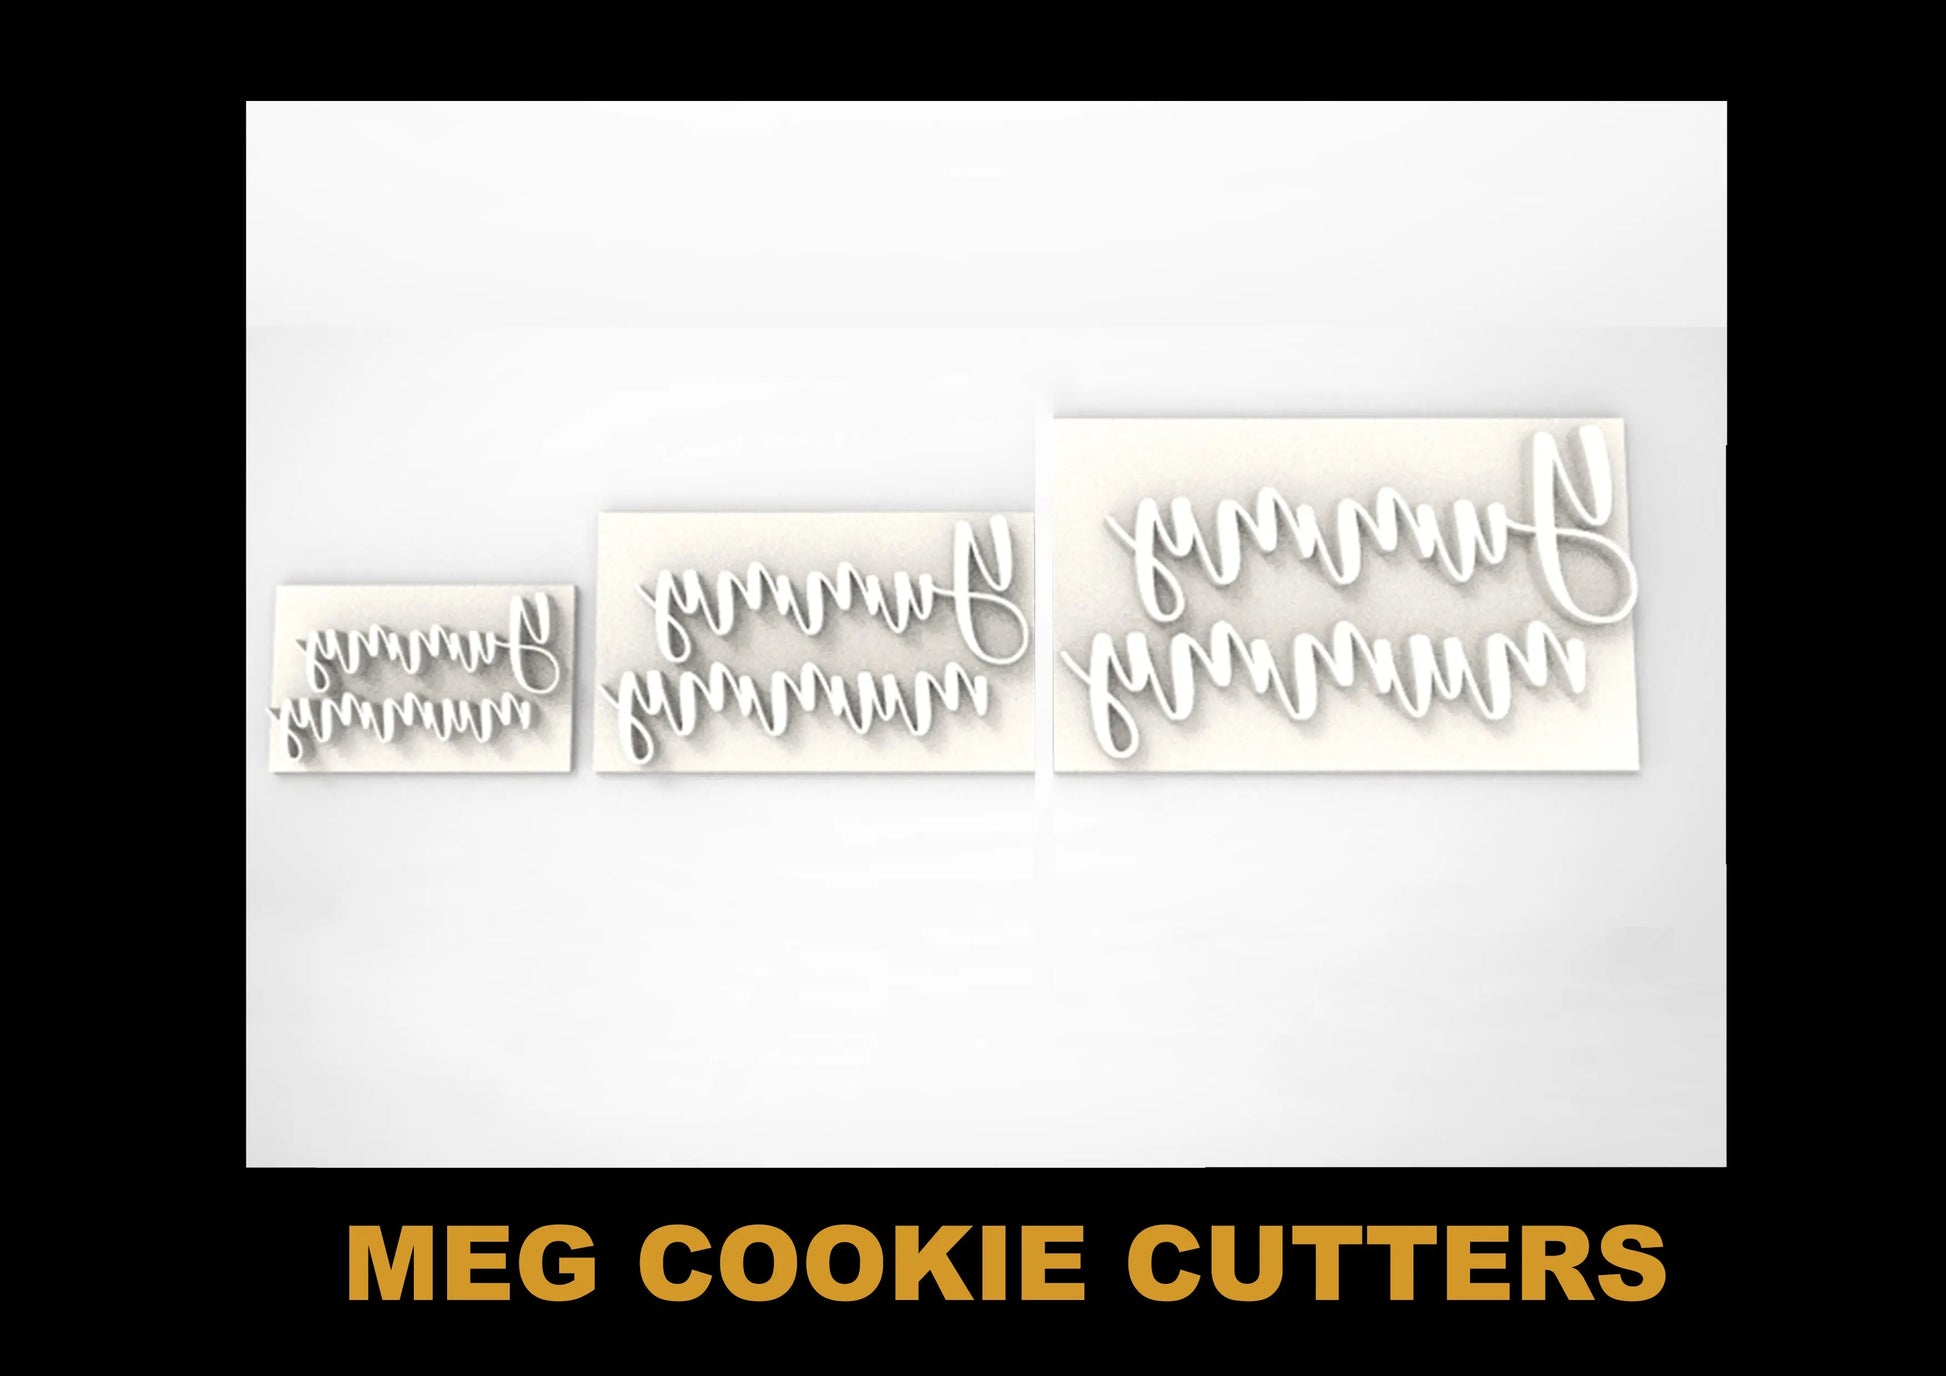 Yummy Mummy stamp cookie cutter Fondant Cutter Cake Decorating 2 - 3 - 4 INCHES UK MEG cookie cutters